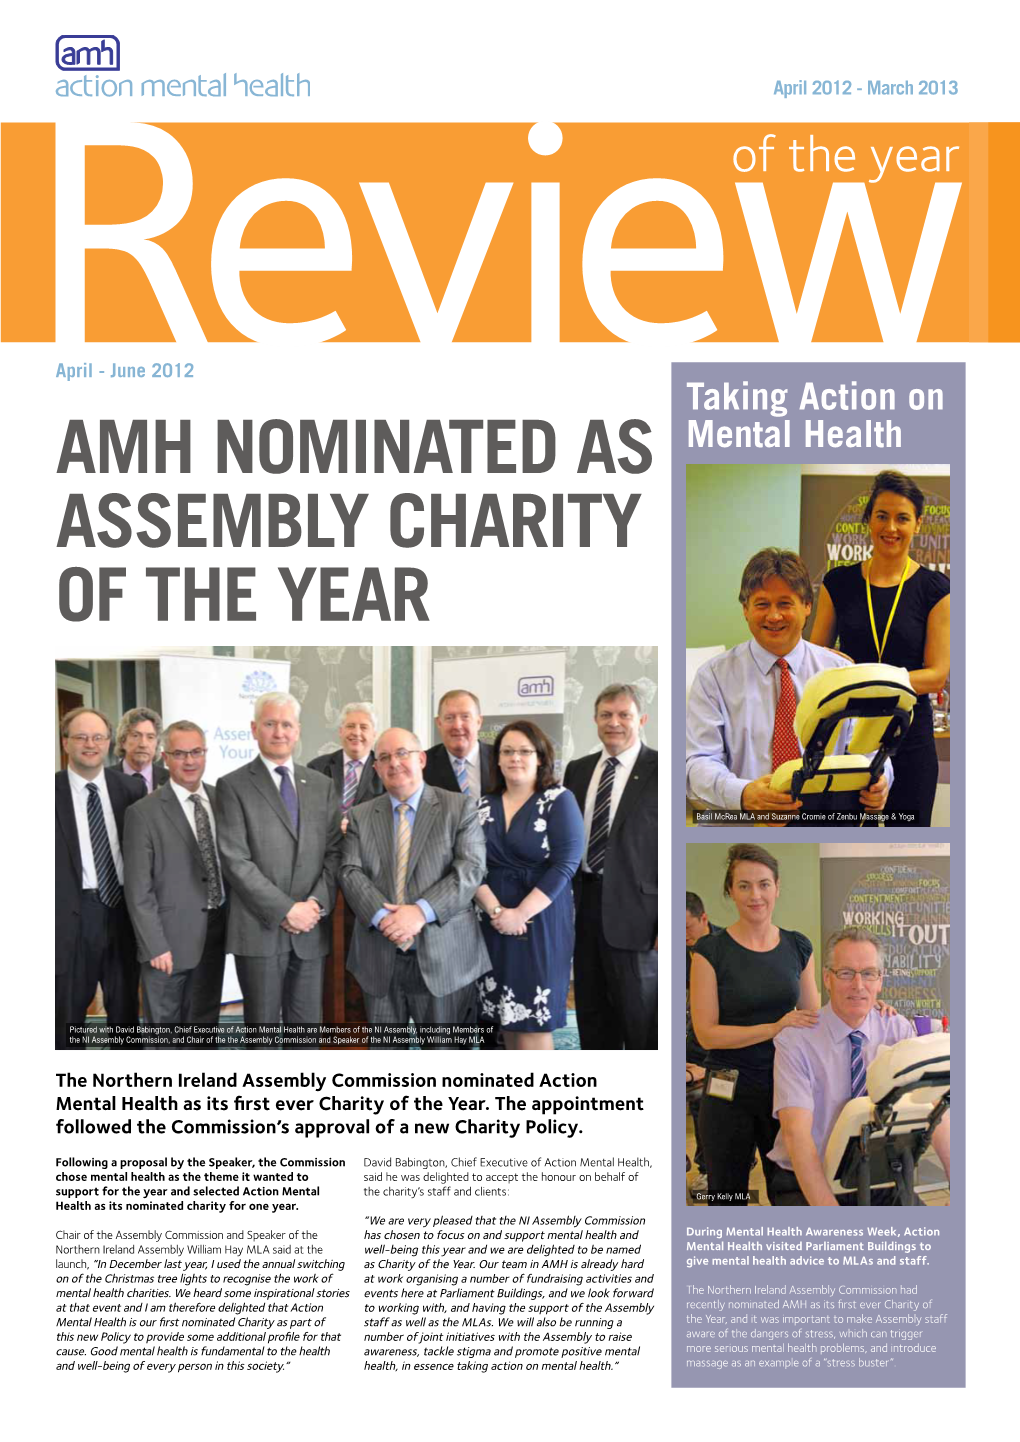 AMH Annual Review of the Year 2012-2013